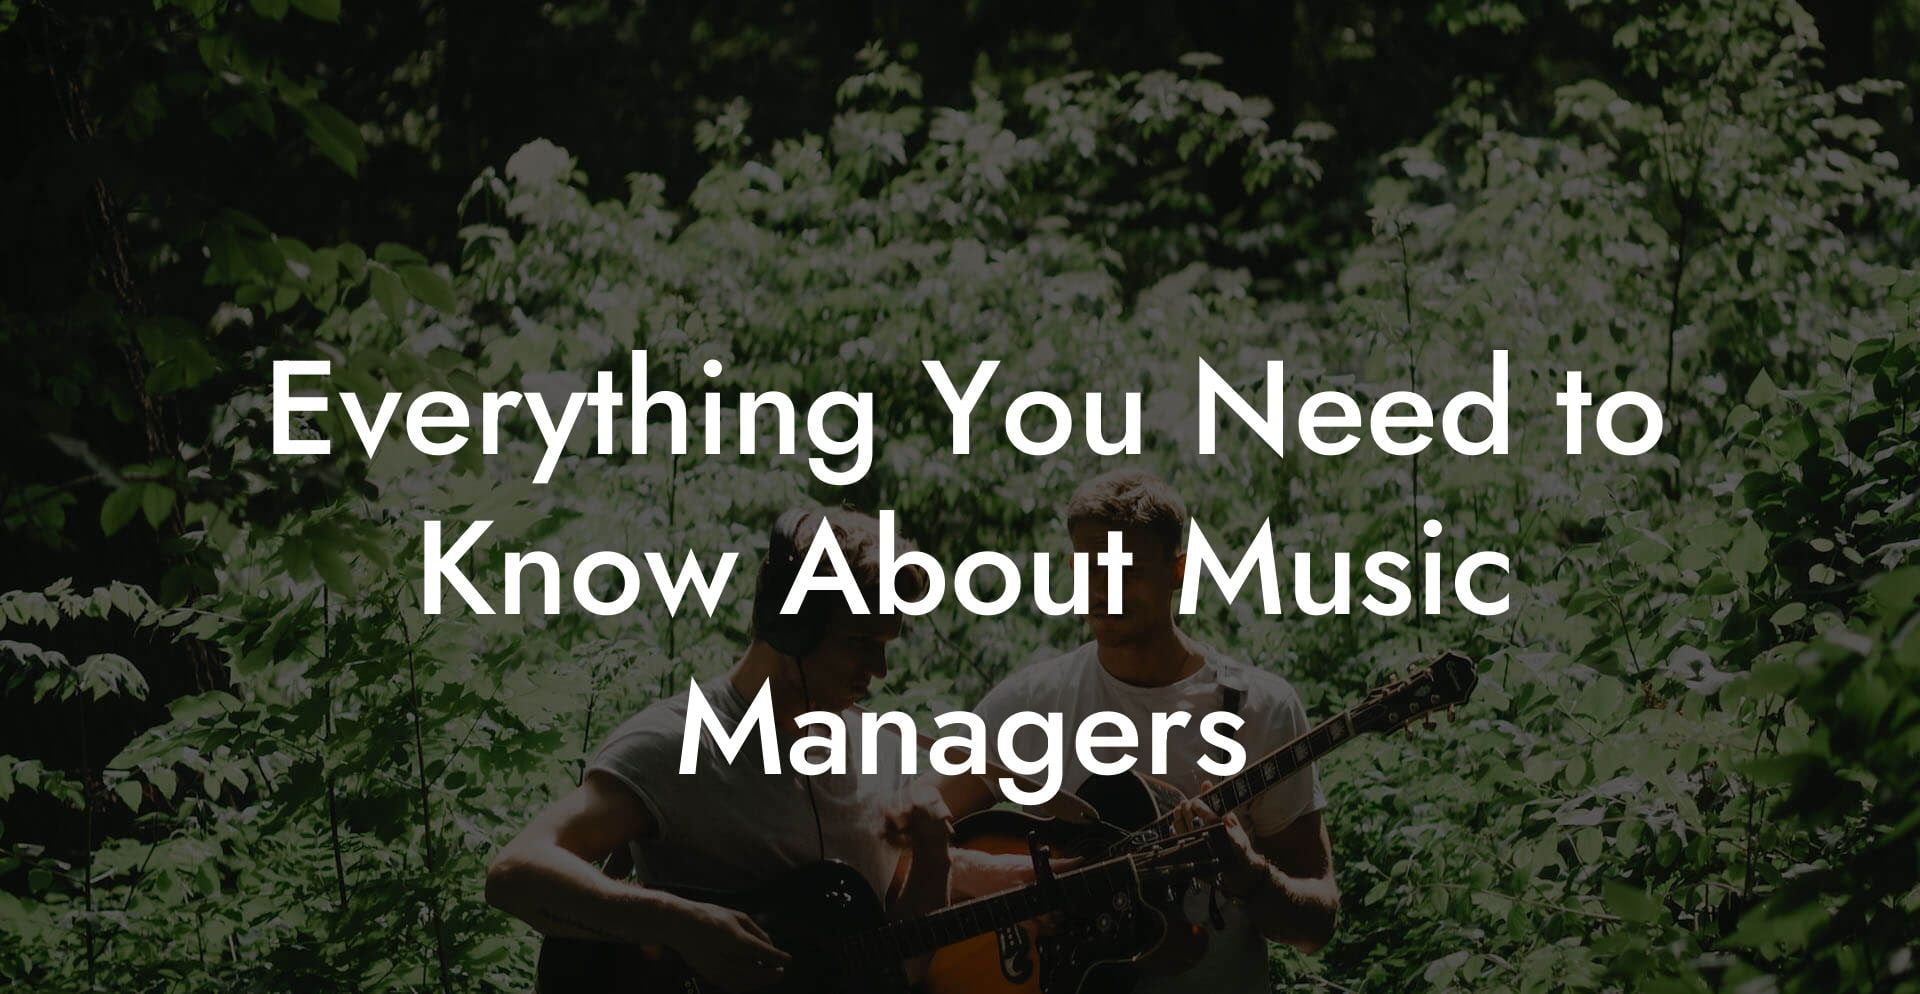 Everything You Need to Know About Music Managers